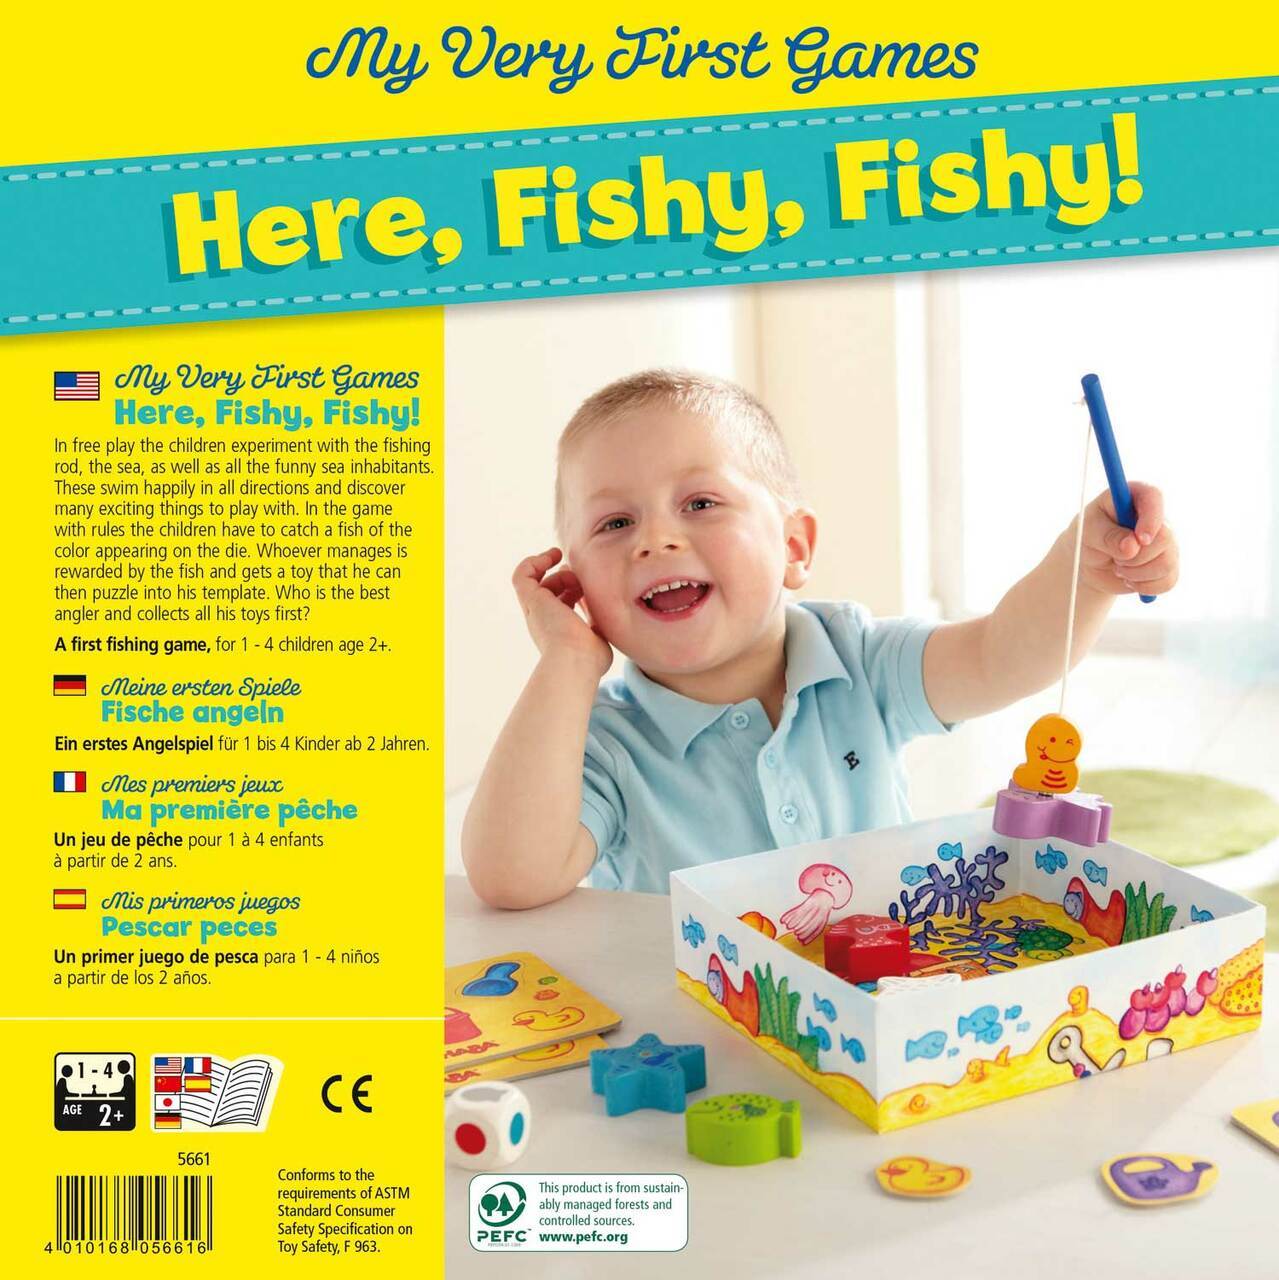 HABA My Very First Games - Here, Fishy, Fishy! - Wood Wood Toys Canada's Favourite Montessori Toy Store